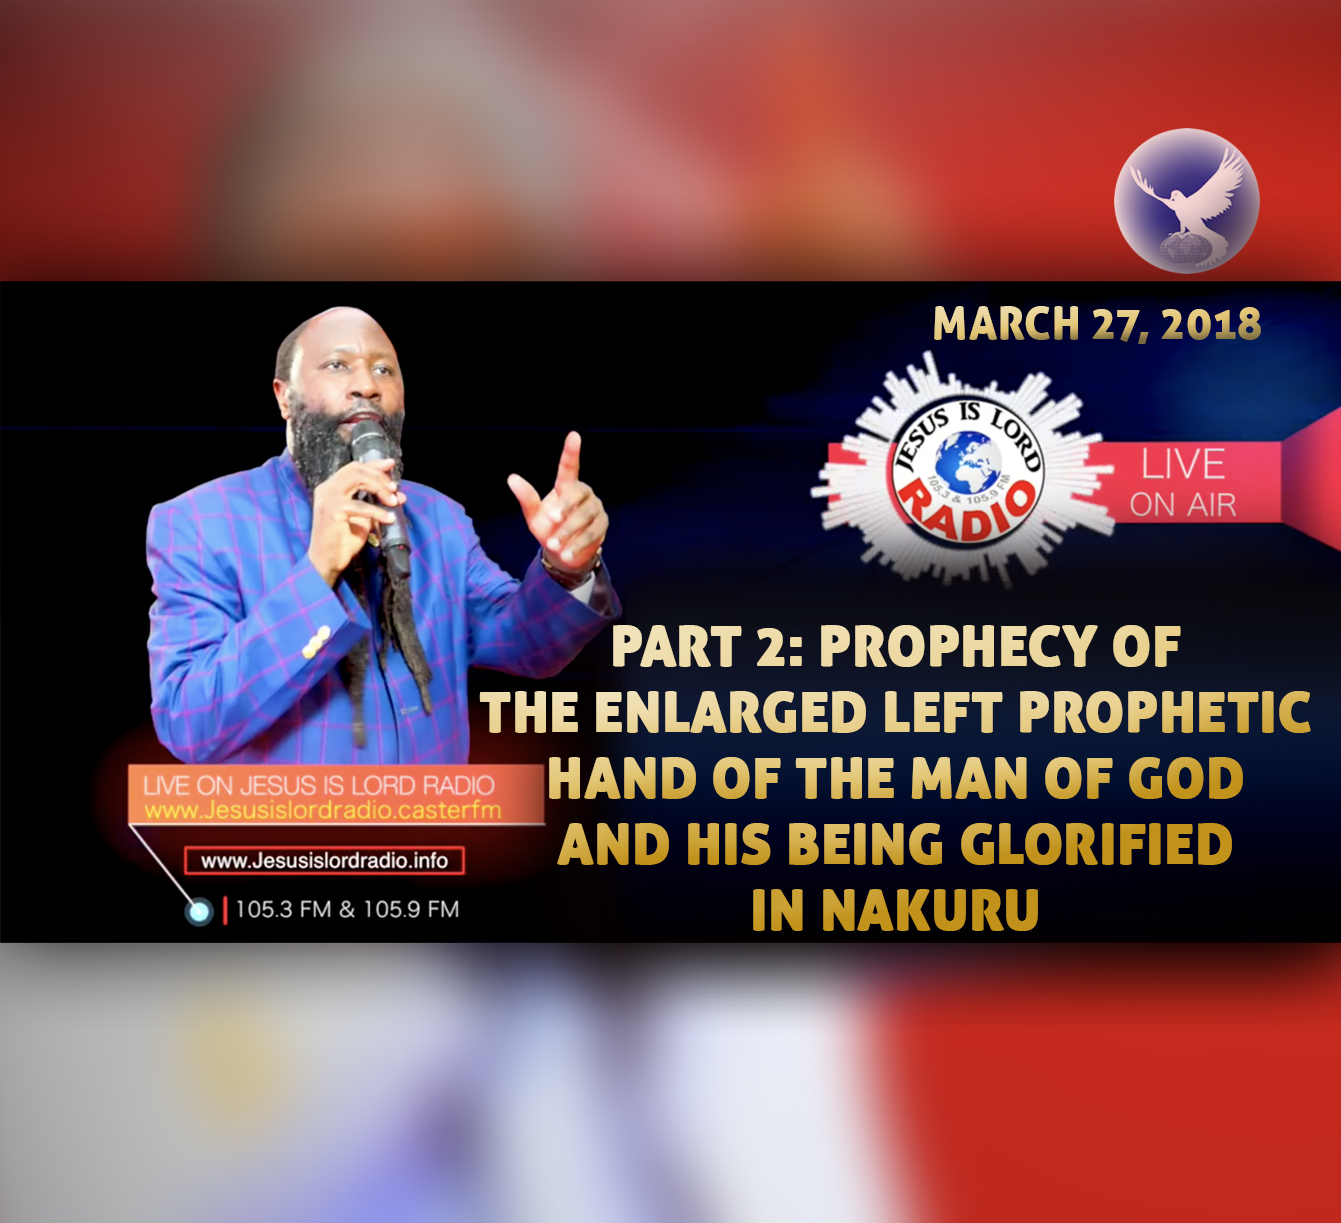 EPISODE 157 - PART 2: PROPHECY OF THE ENLARGED LEFT PROPHETIC HAND OF THE MAN OF GOD AND HIS BEING GLORIFIED IN NAKURU (27MAR2018) - PROPHET DR. OWUOR